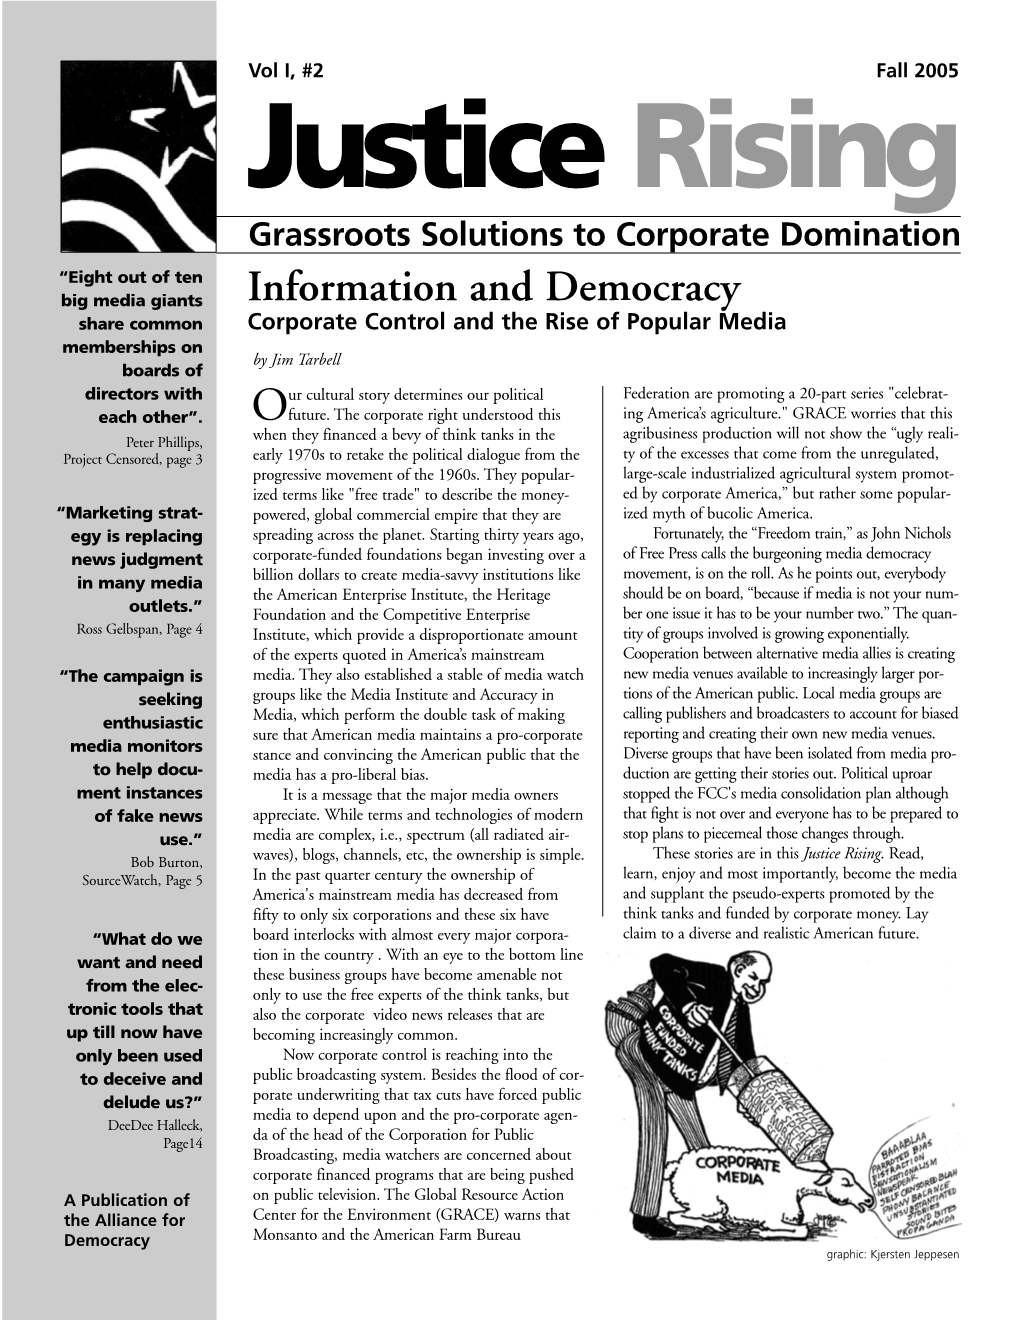 Justice Rising Grassroots Solutions to Corporate Domination